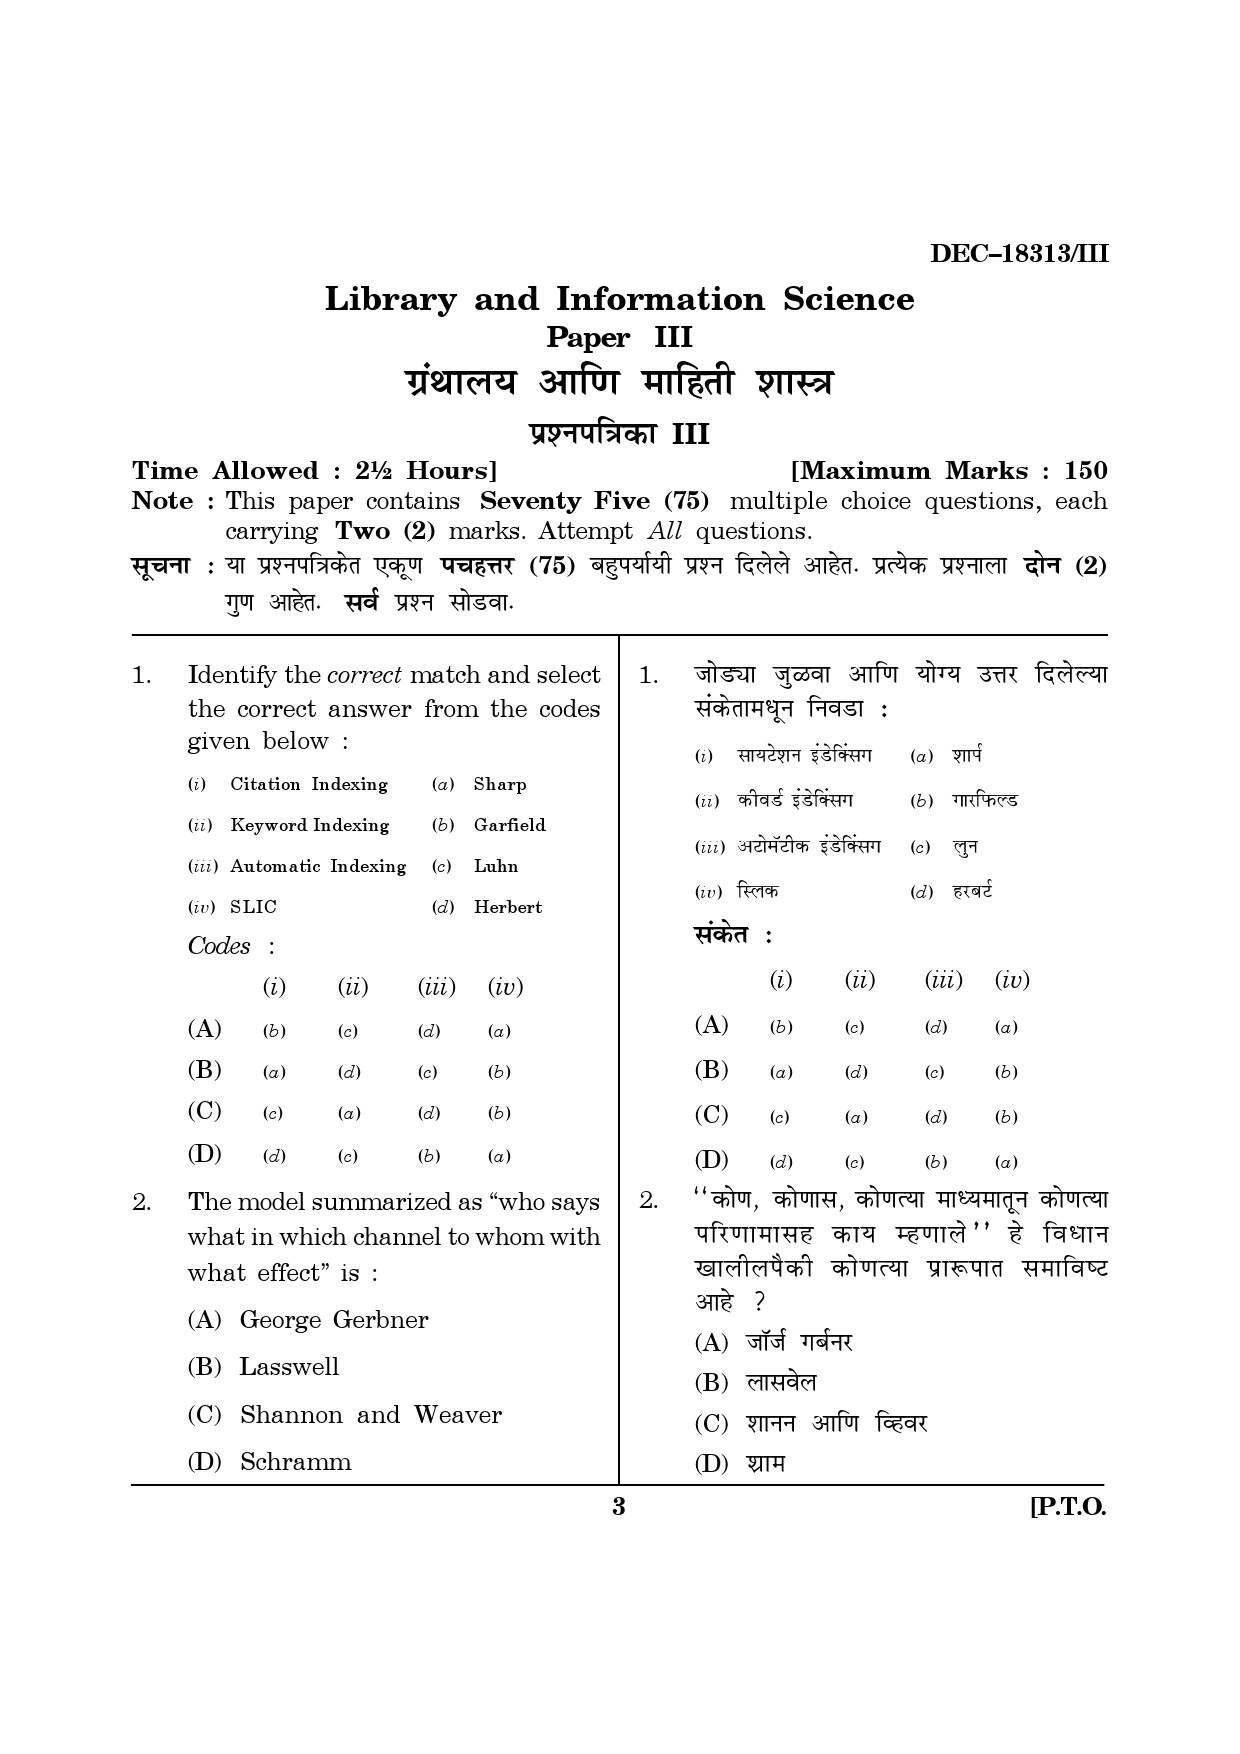 Maharashtra SET Library Information Science Question Paper III December 2013 2